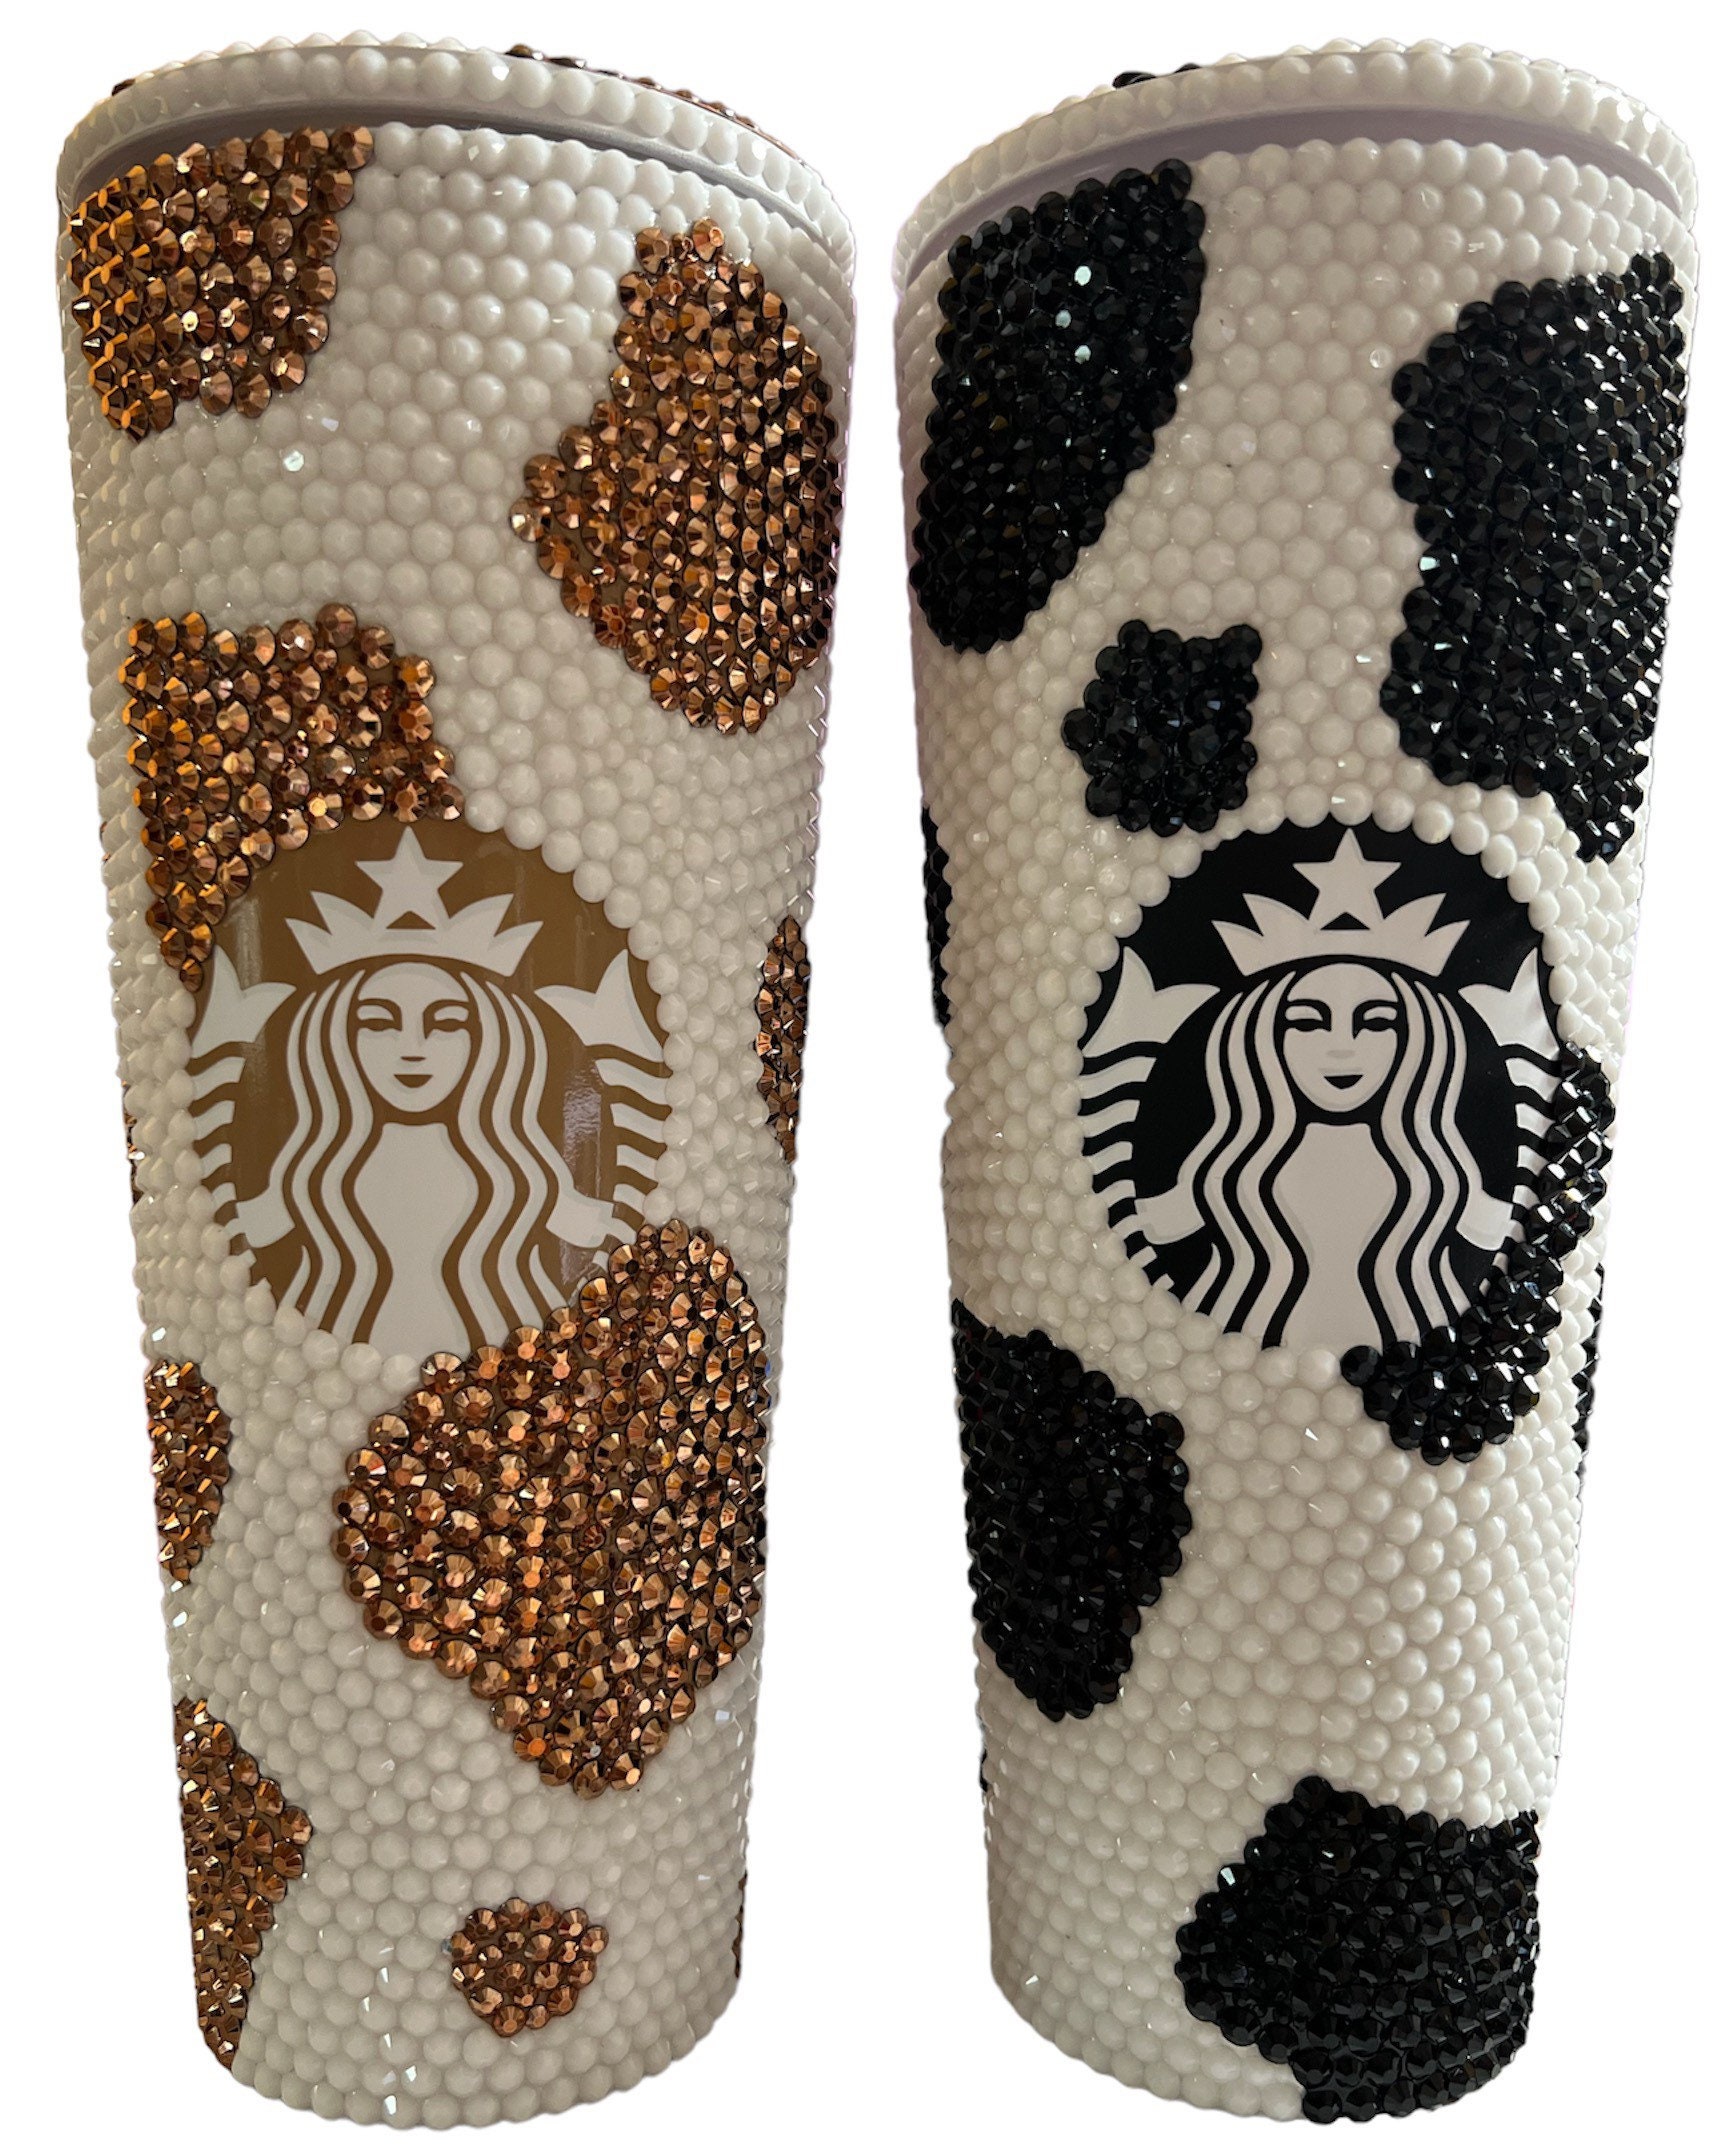 Crystal Starbucks Cup – Bling'd Up